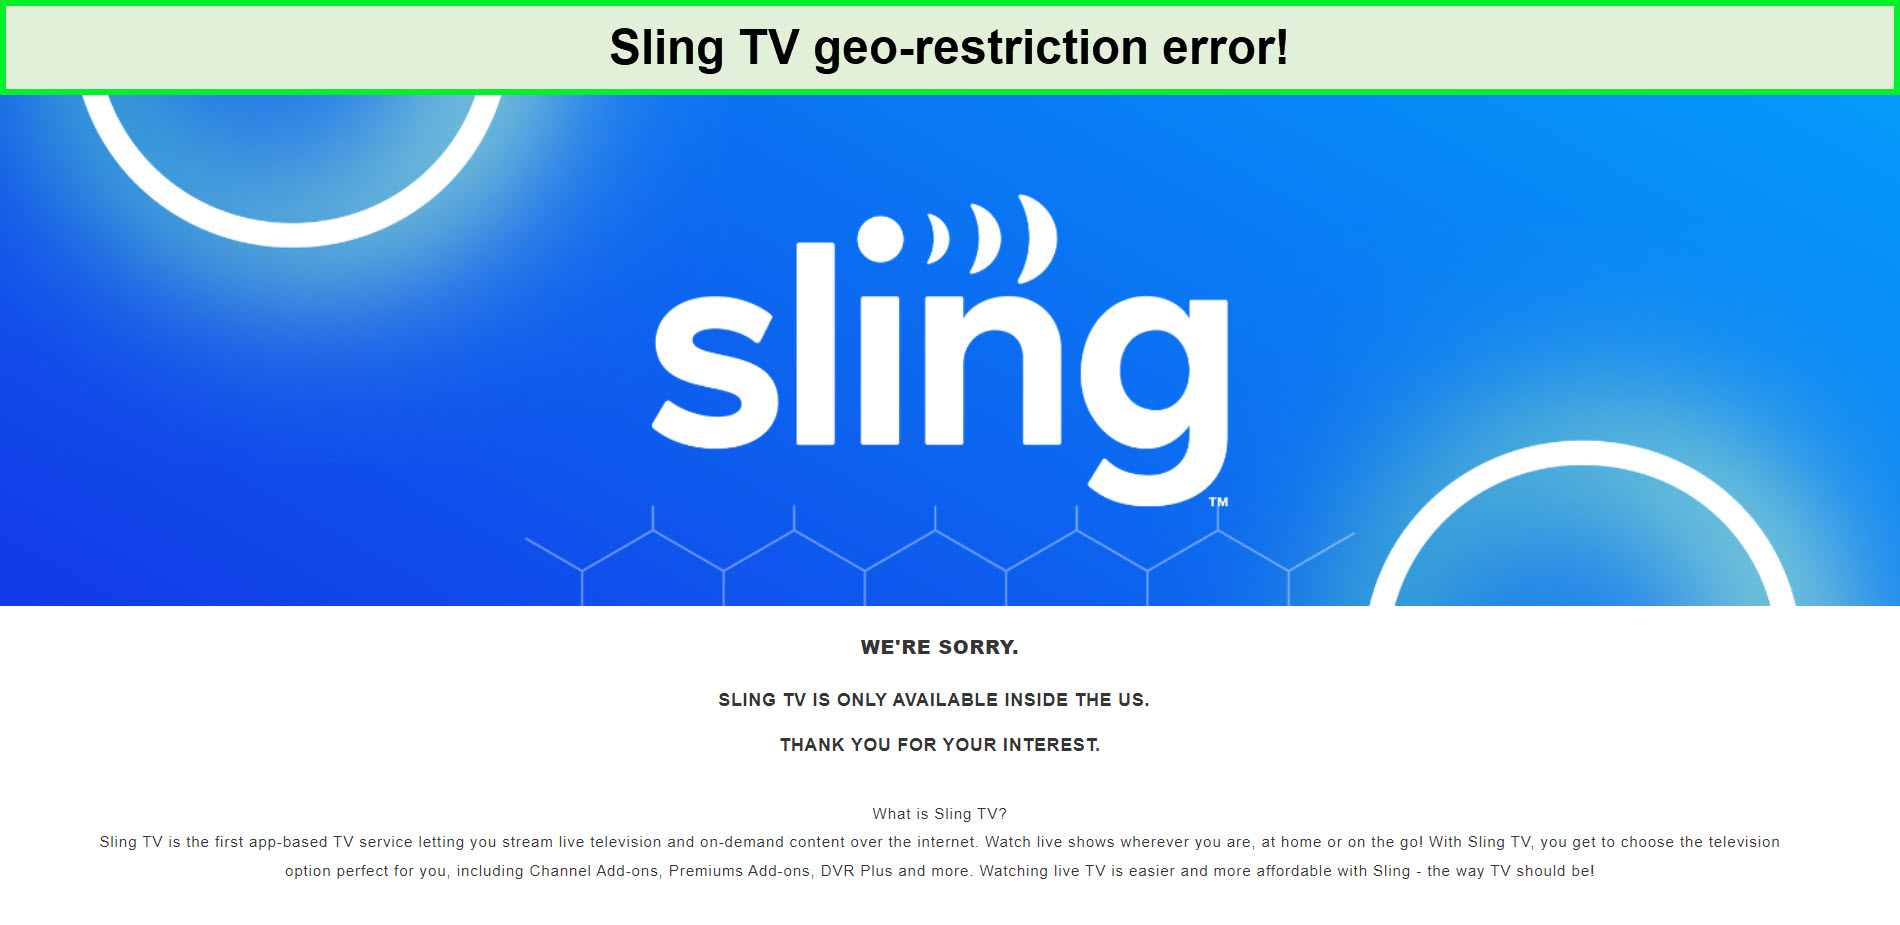 us-sling-geo-restriction-error-in-mexico